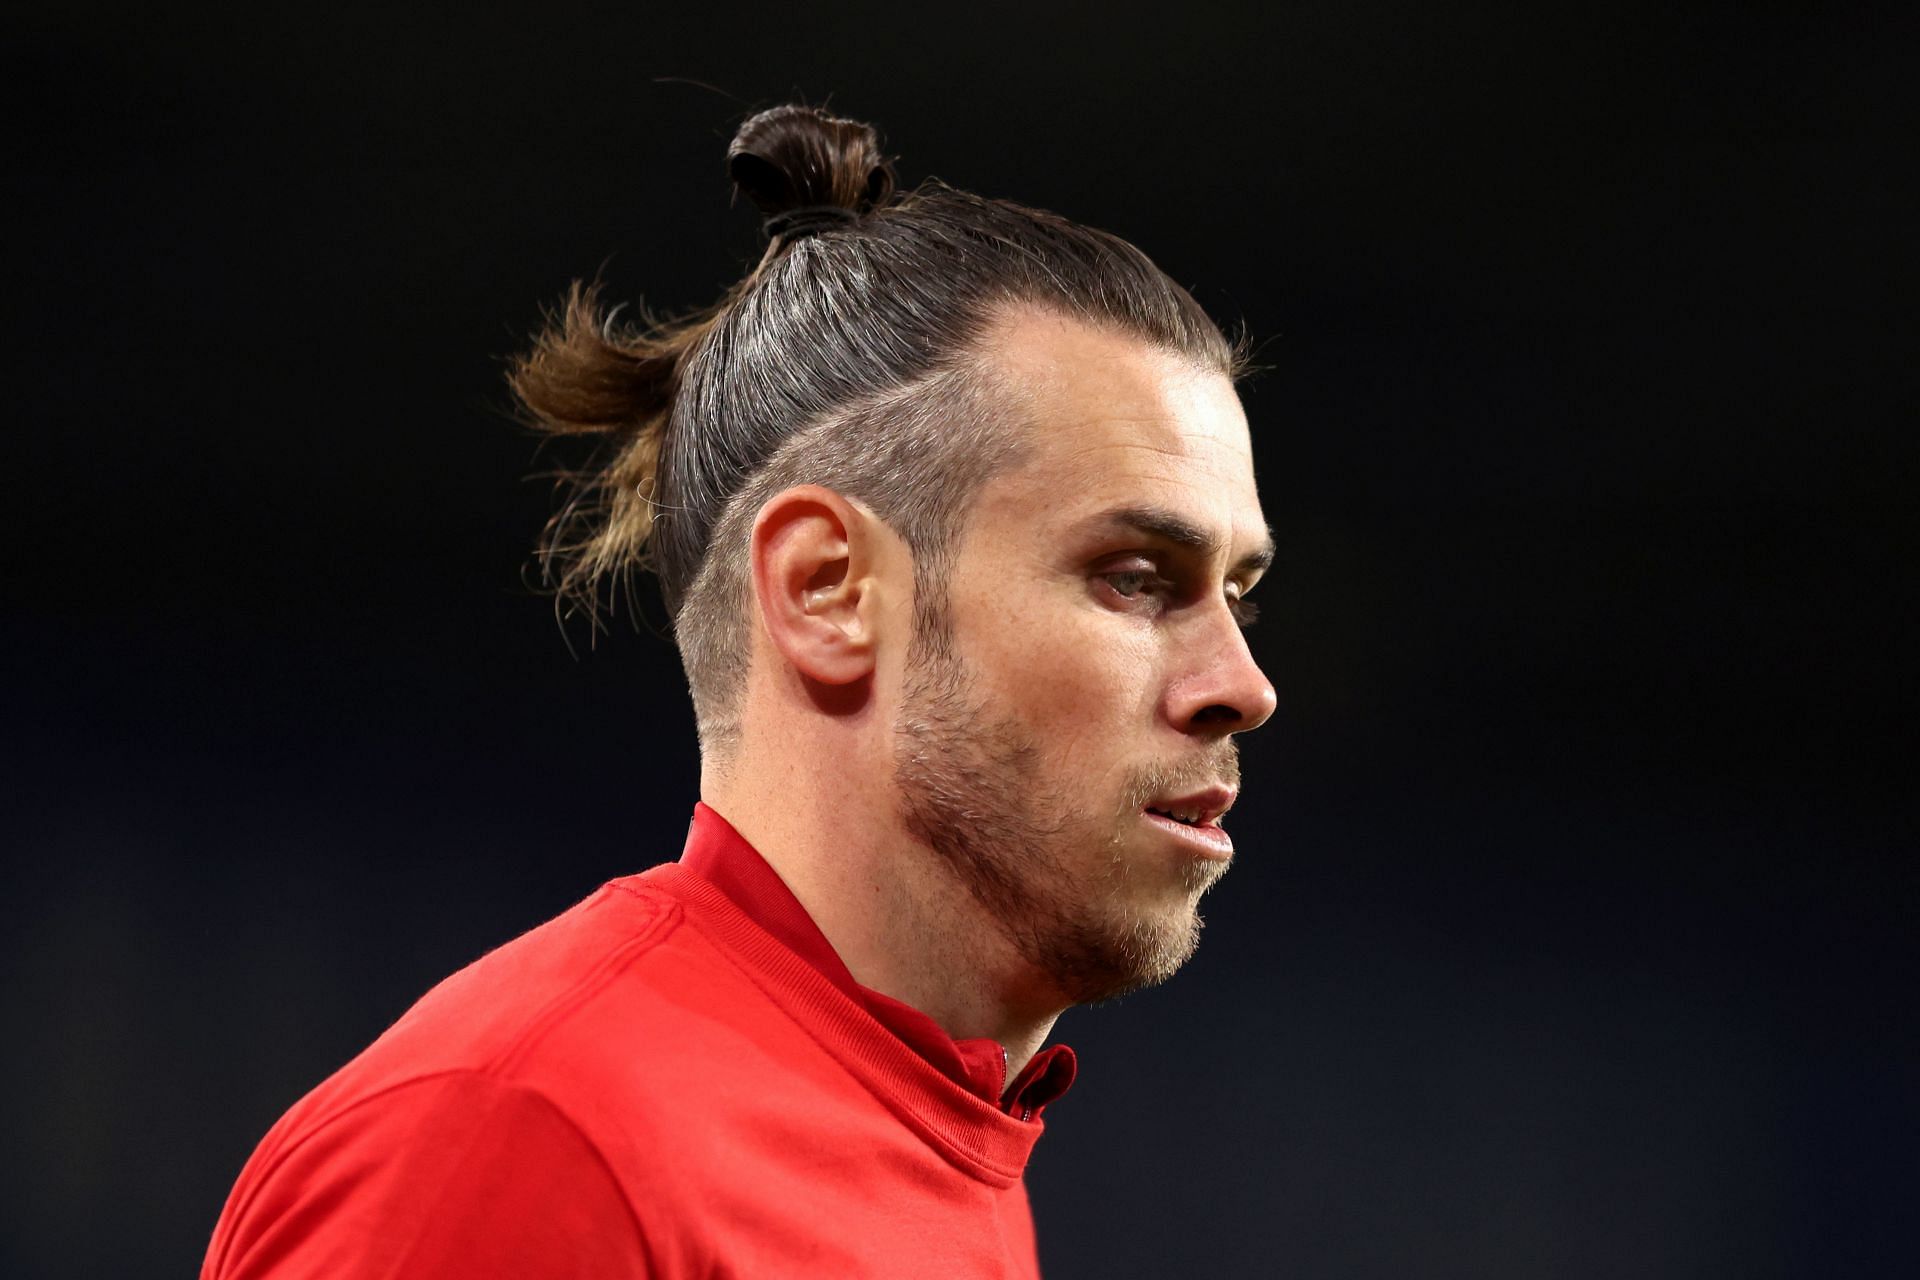 Gareth Bale remains determined to play for Real Madrid.